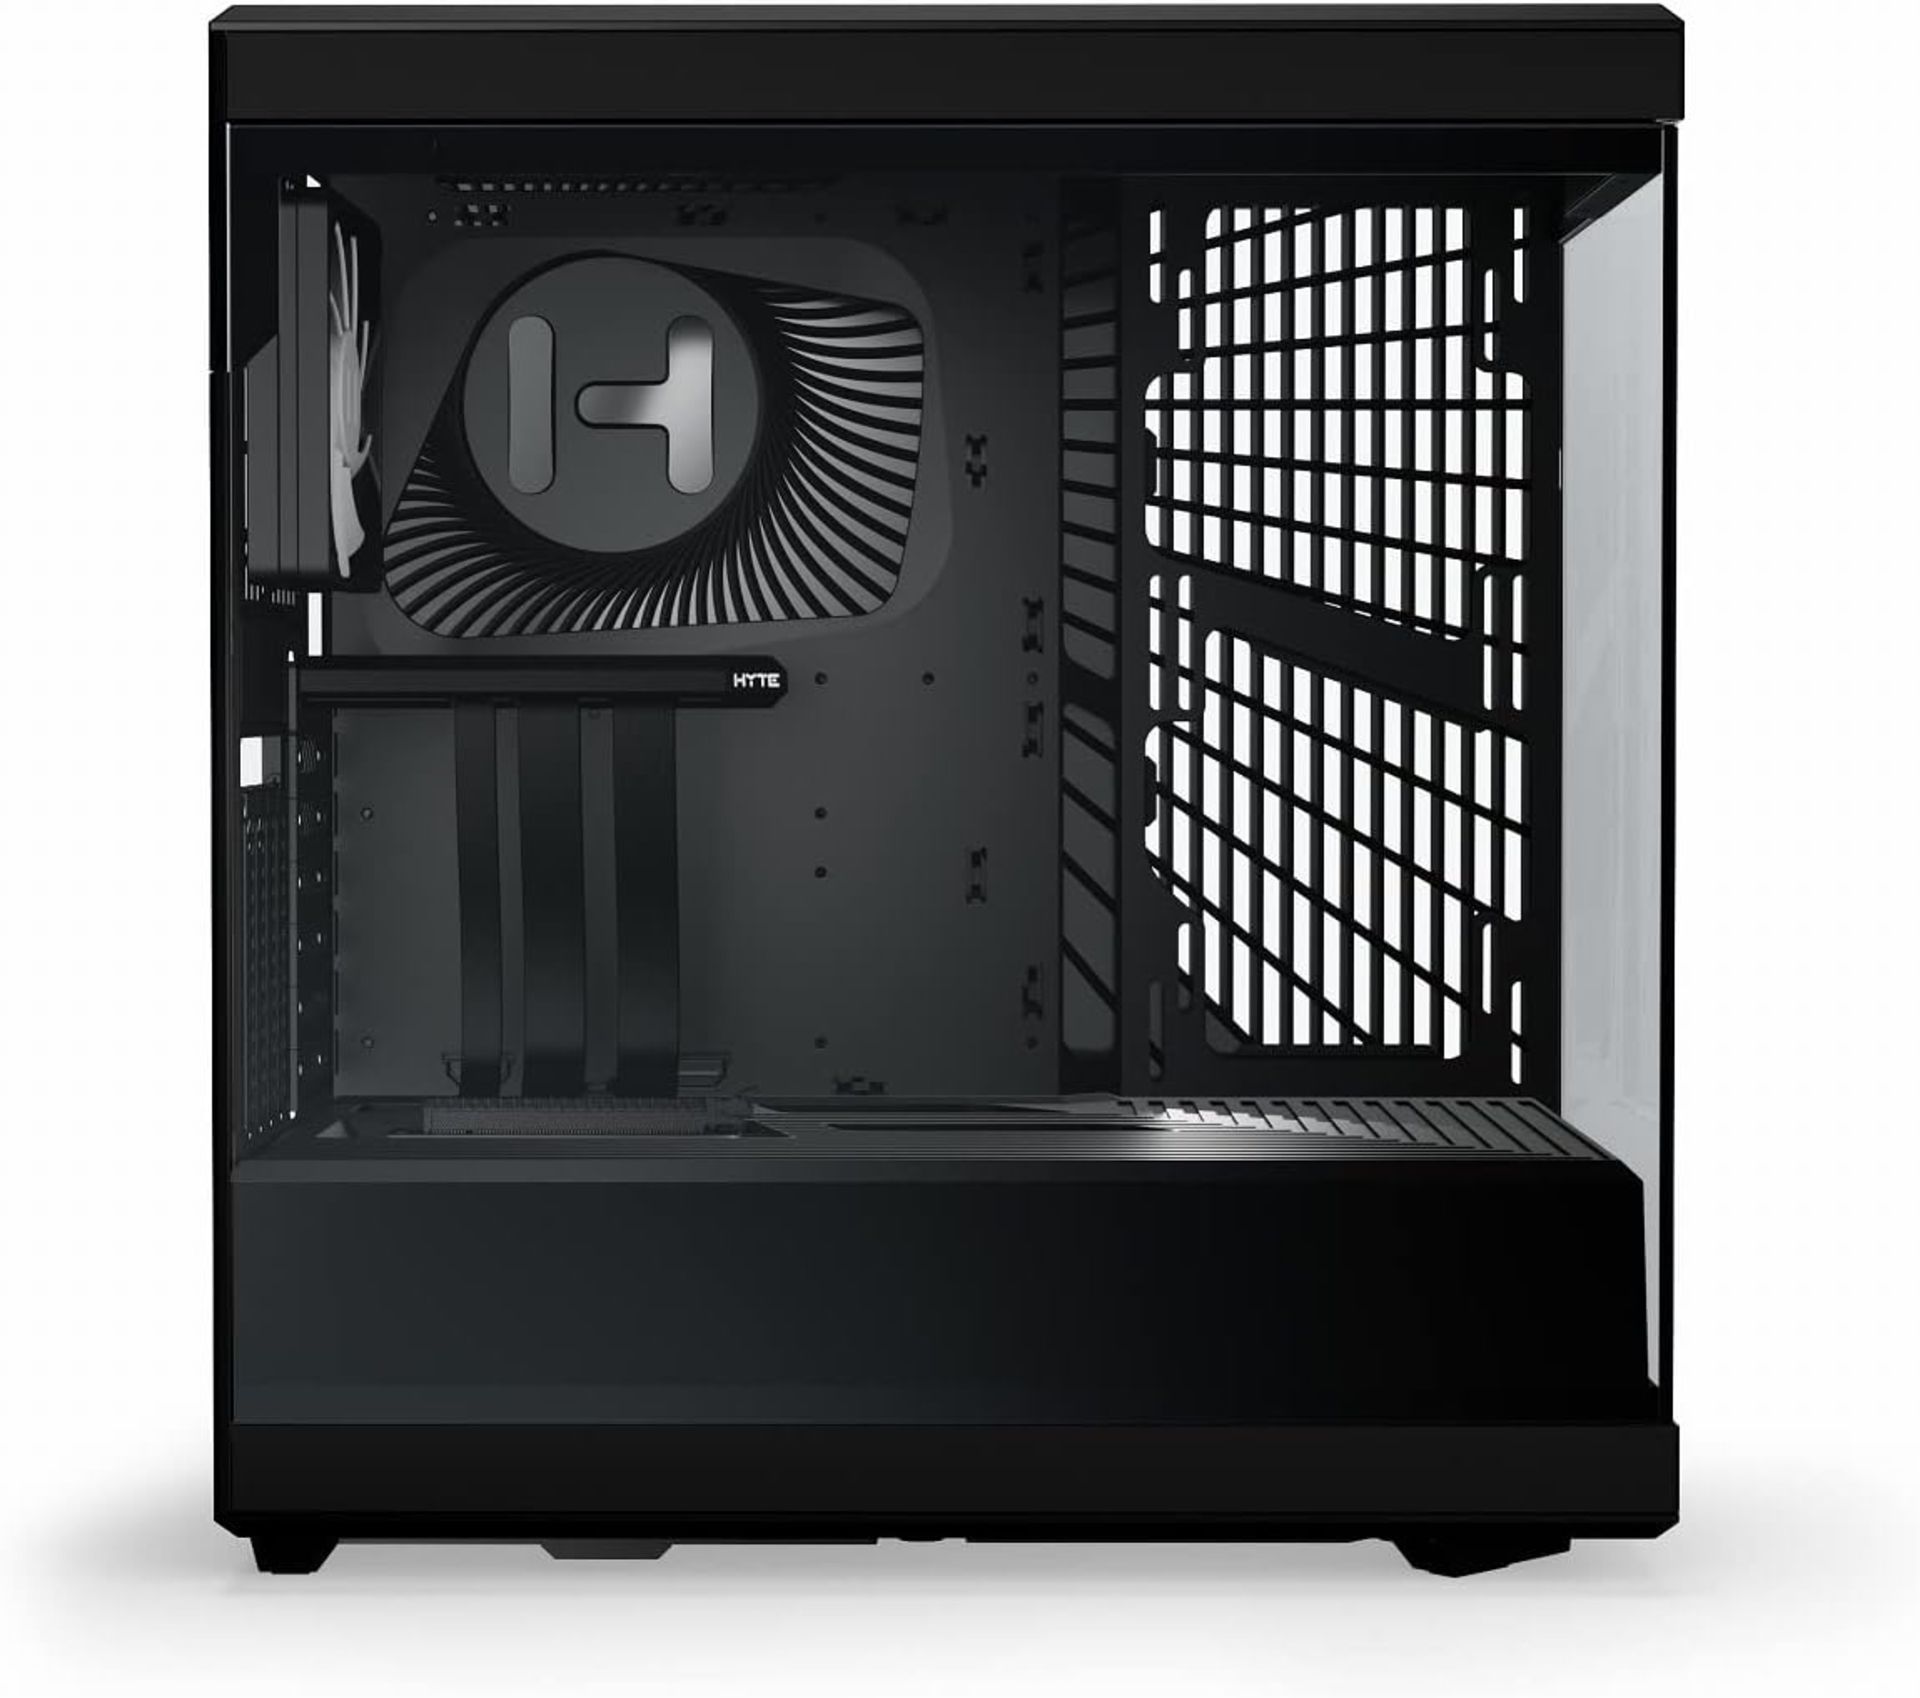 NEW & BOXED HYTE Y40 Mid-Tower ATX Case - Black. RRP £159.98. (R15R). The HYTE Y40 Mid-Tower ATX - Image 4 of 5